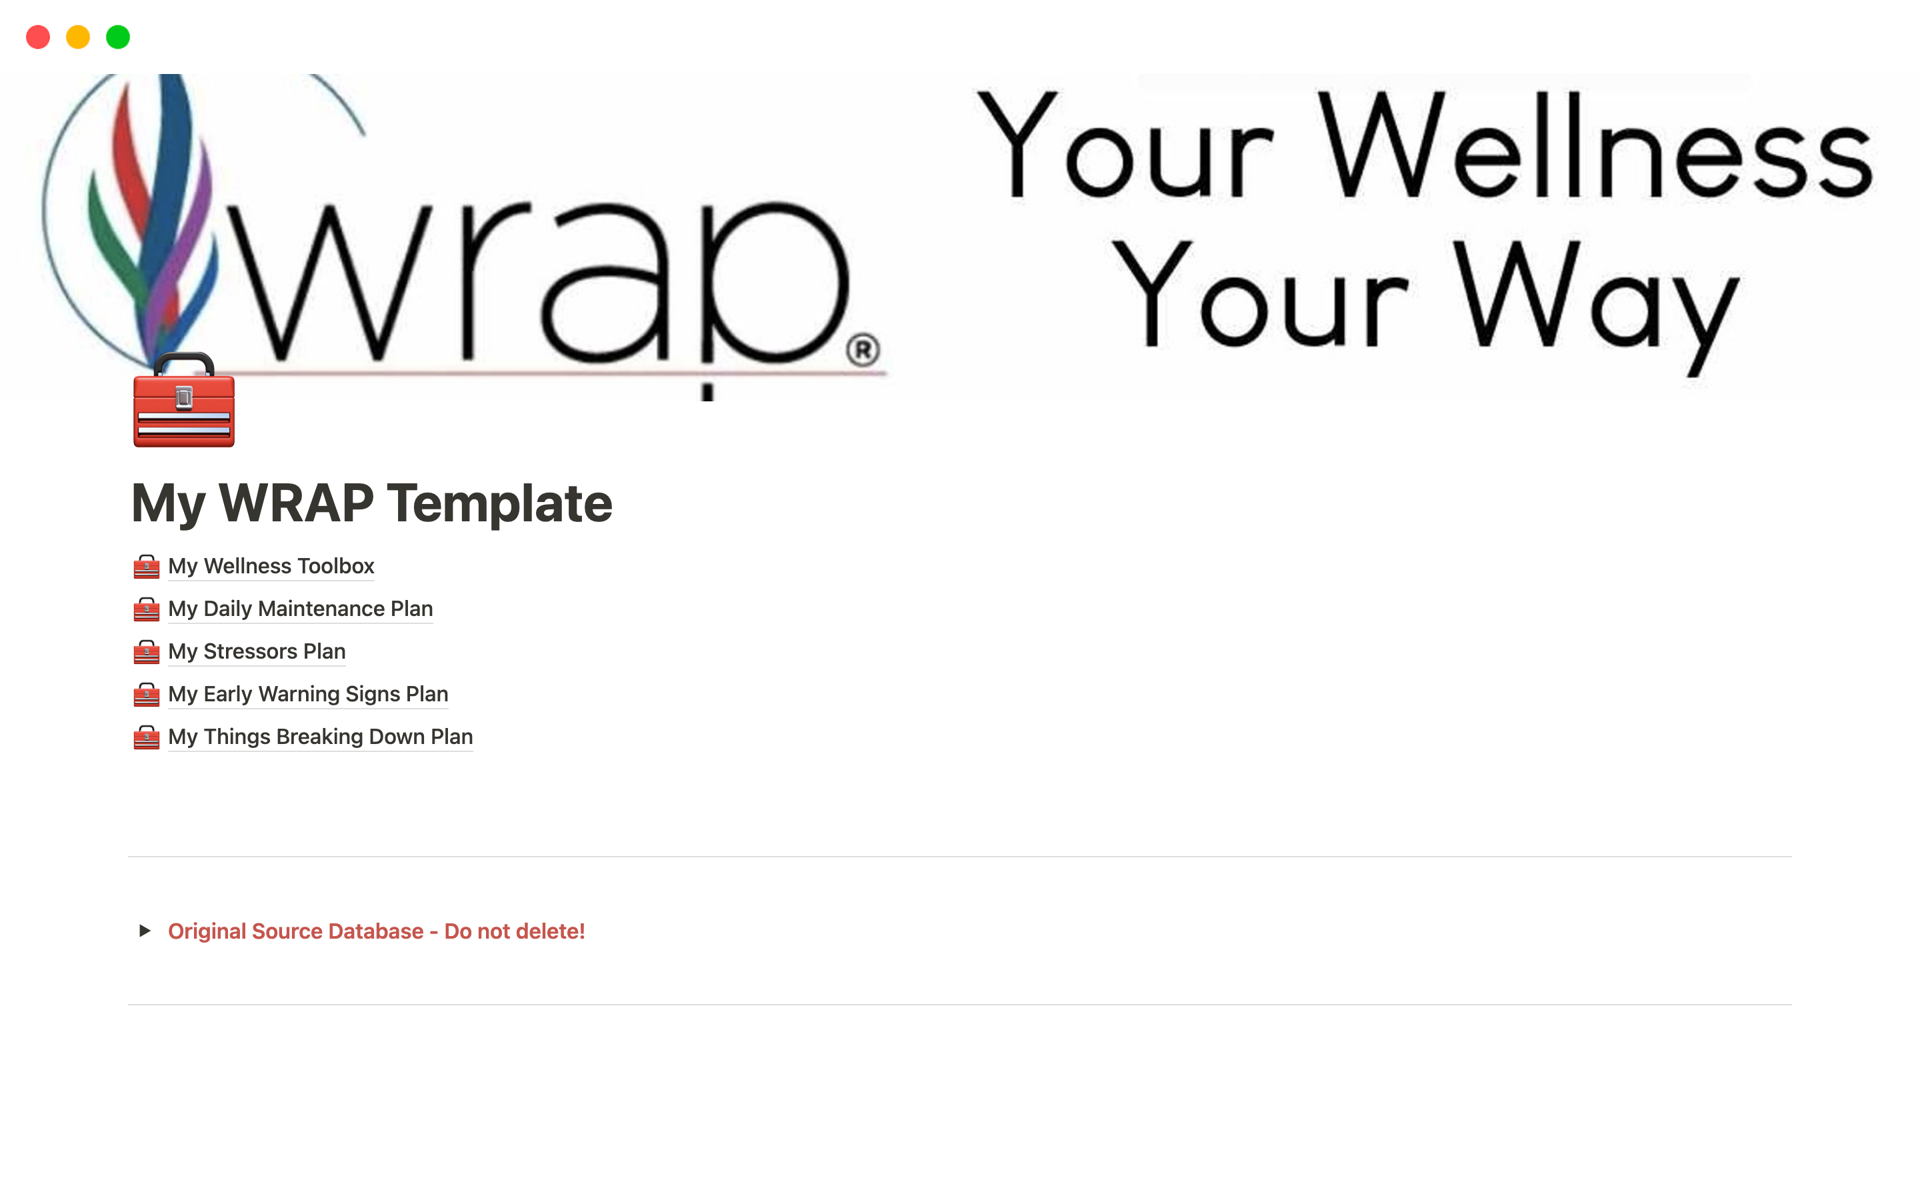 Form to manage your WRAP online.